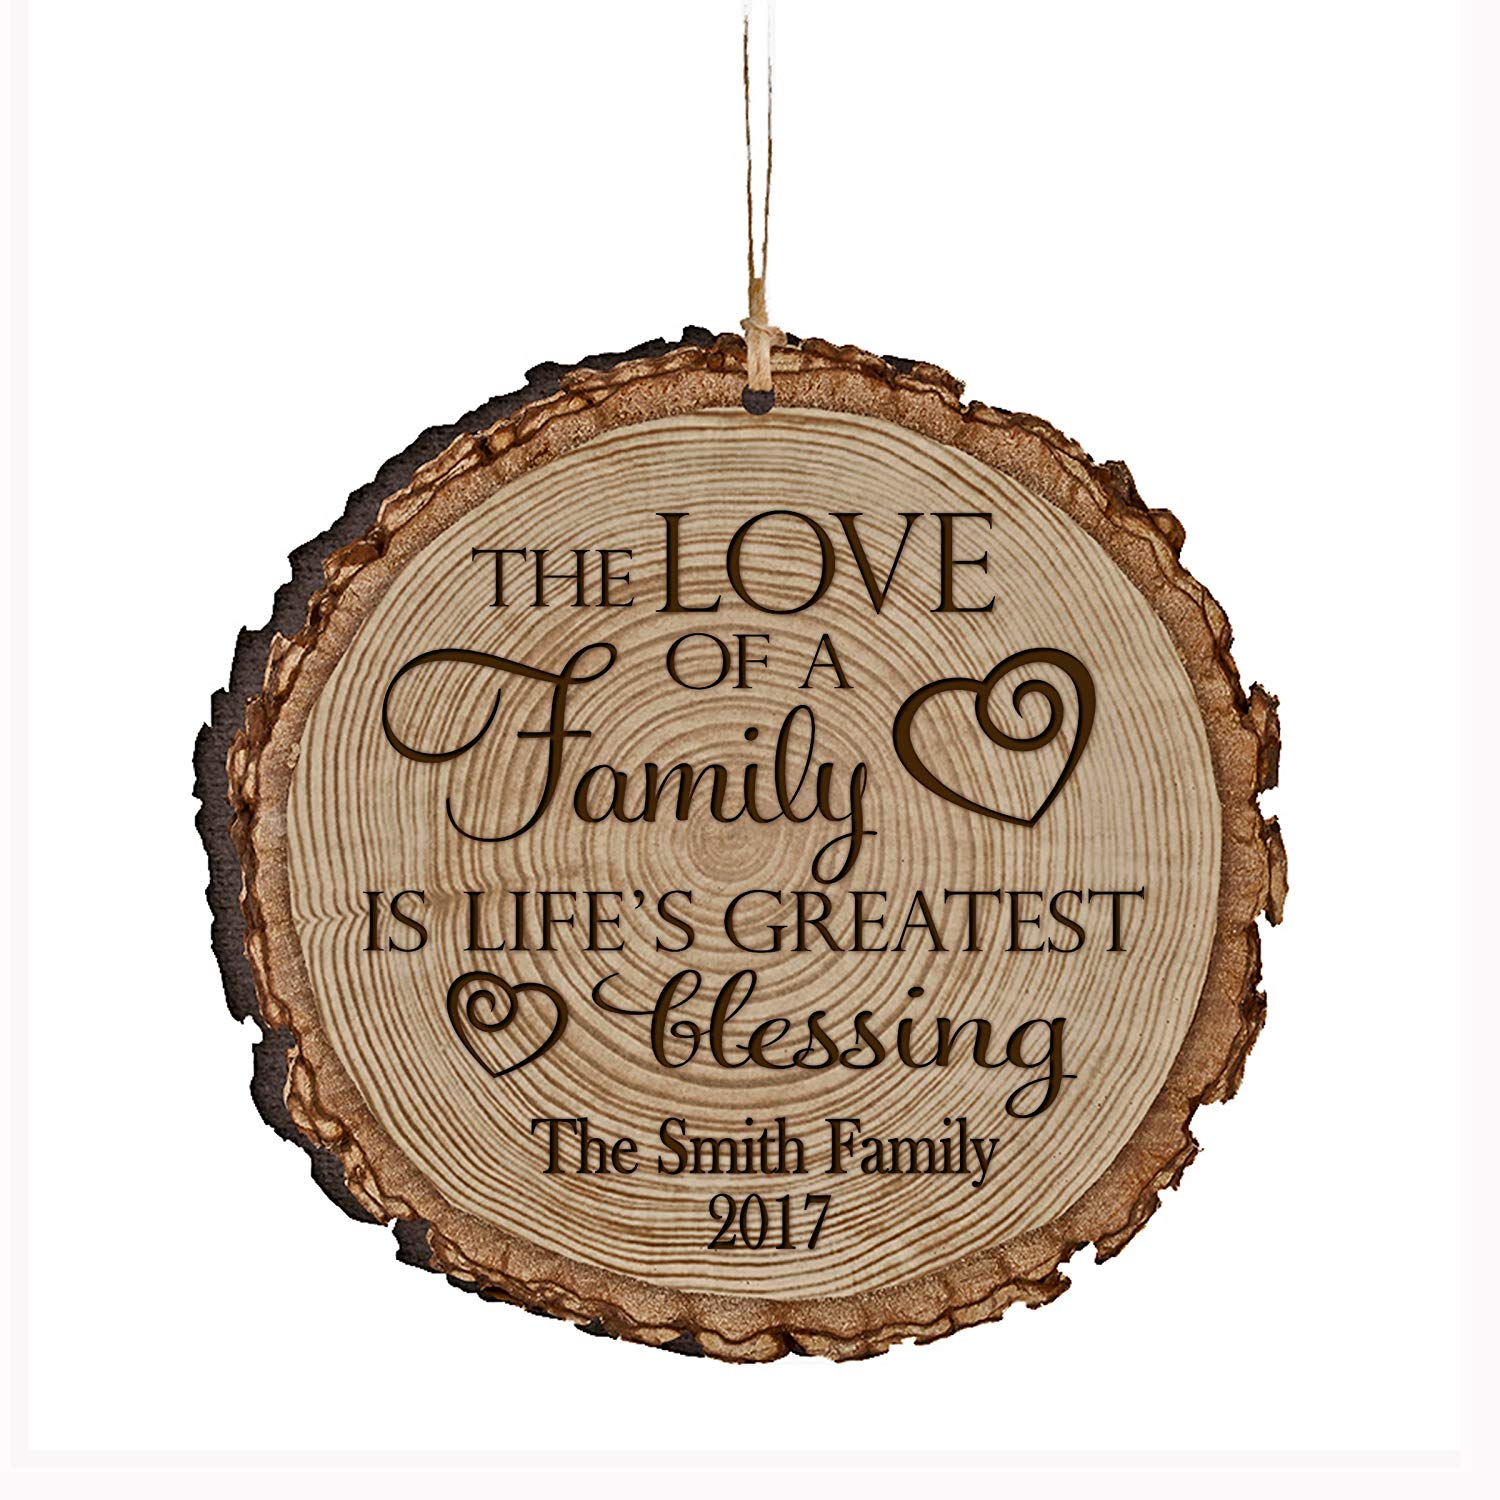 Personalized Engraved Wooden Valentines Ornament Gift - The Love of a Family - LifeSong Milestones